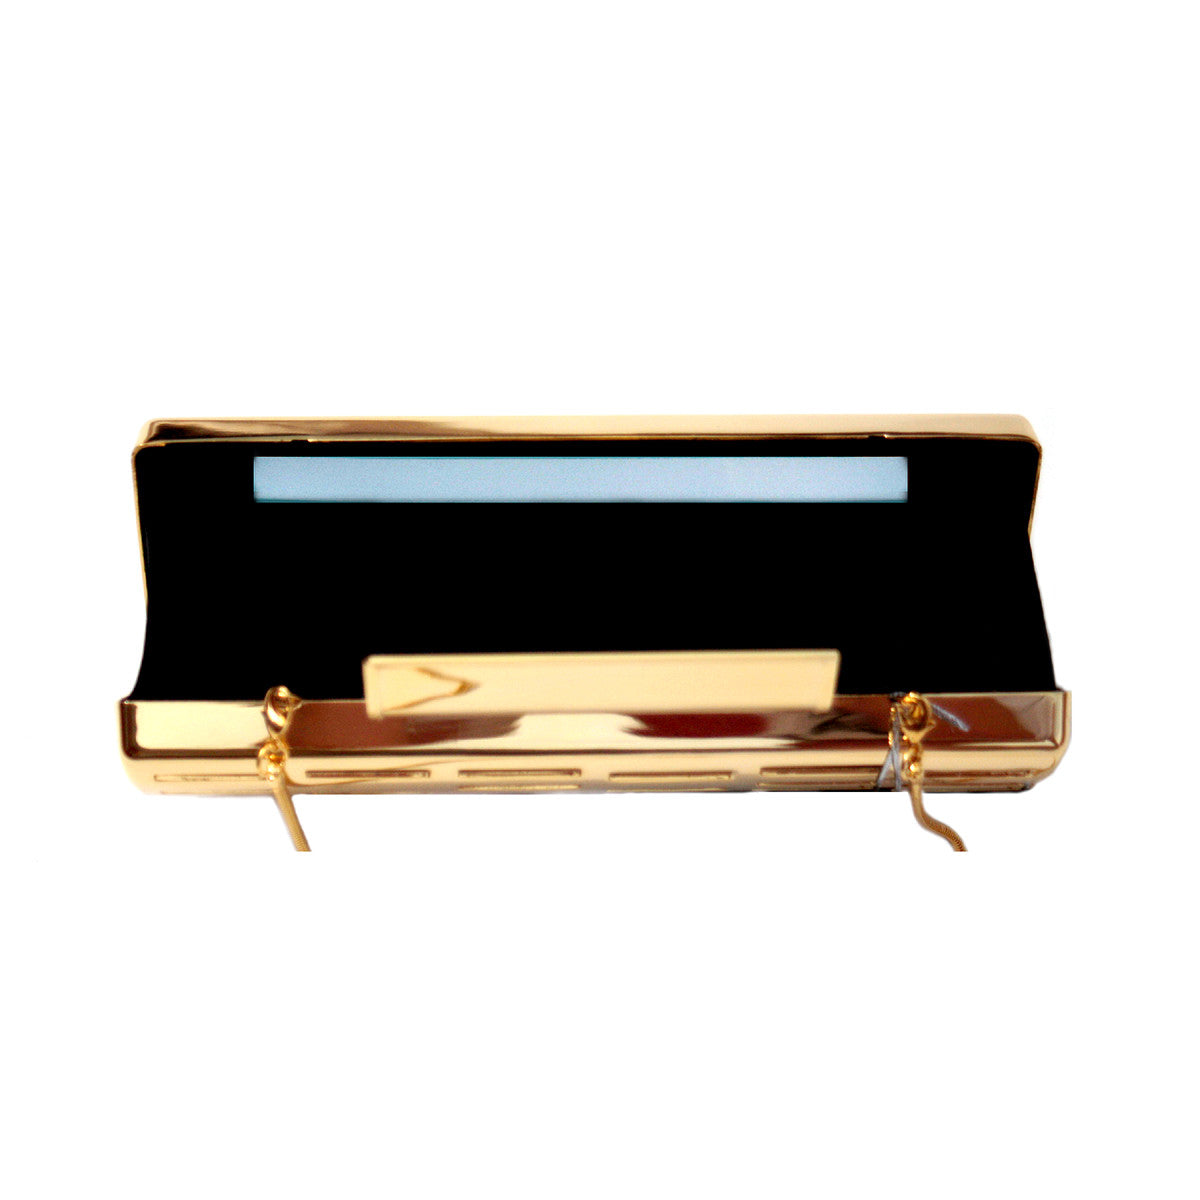 Glass Handbag Rave metal clutch in gold with lighting system